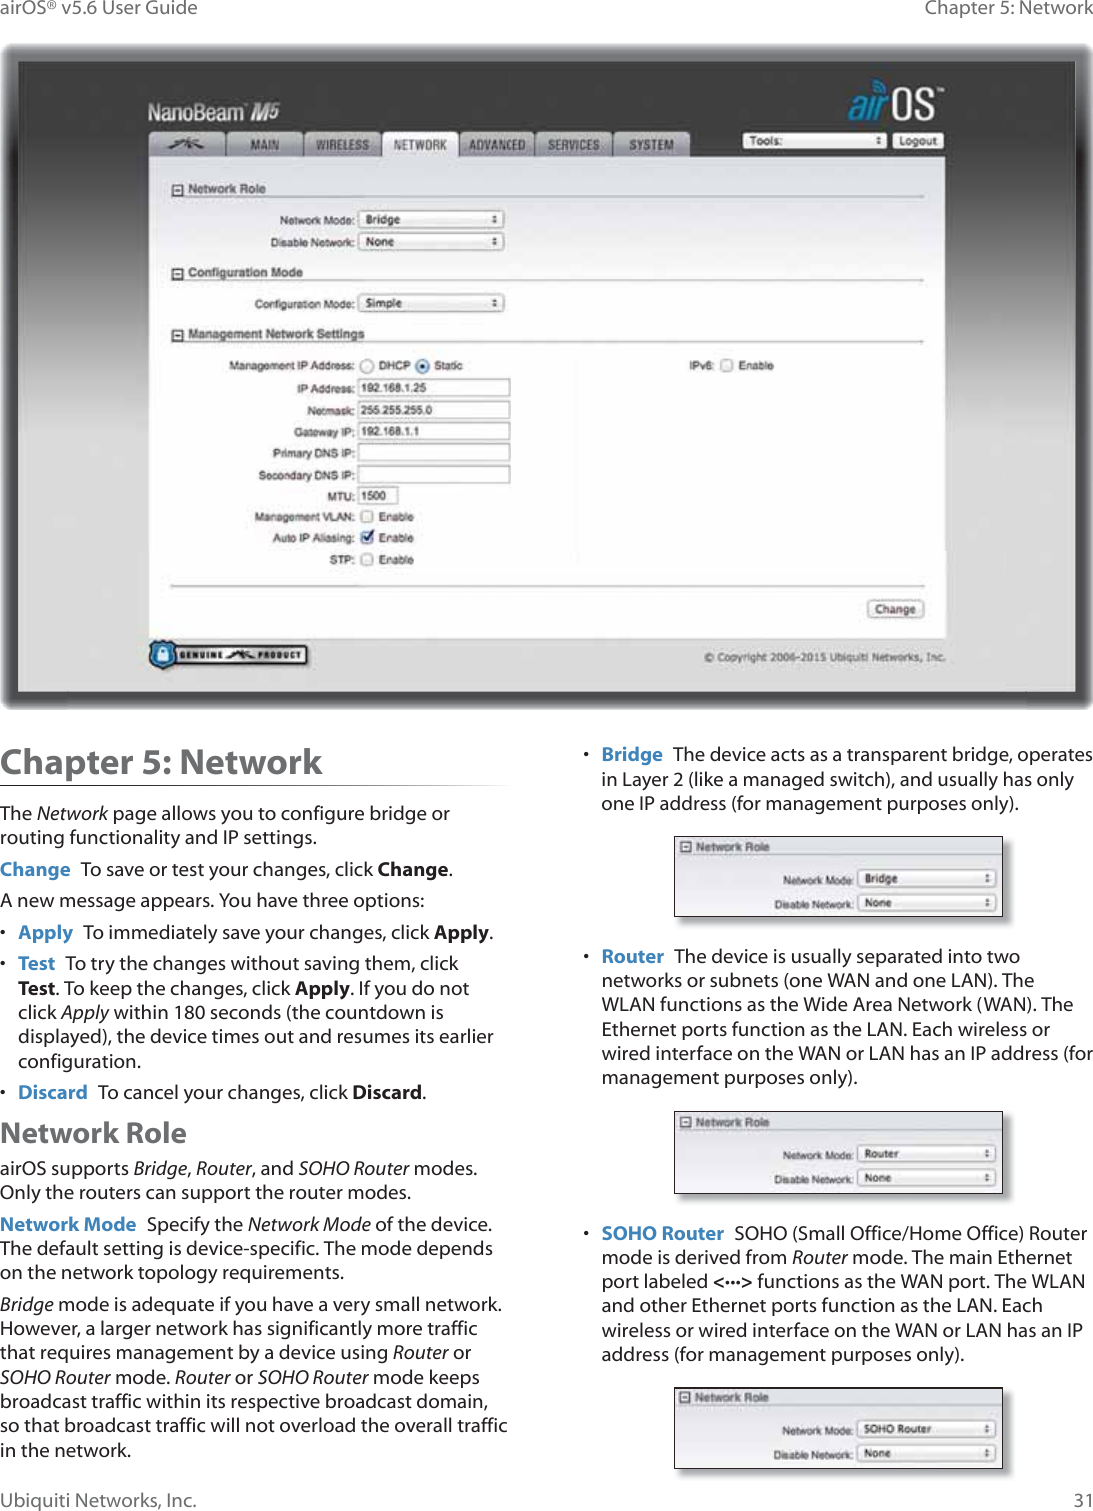 31Chapter 5: NetworkairOS® v5.6 User GuideUbiquiti Networks, Inc.Chapter 5: NetworkThe Network page allows you to configure bridge or routing functionality and IP settings.Change  To save or test your changes, click Change.A new message appears. You have three options:•  Apply  To immediately save your changes, click Apply.•  Test  To try the changes without saving them, click Test. To keep the changes, click Apply. If you do not click Apply within 180 seconds (the countdown is displayed), the device times out and resumes its earlier configuration.•  Discard  To cancel your changes, click Discard.Network RoleairOS supports Bridge, Router, and SOHO Router modes. Only the routers can support the router modes.Network Mode  Specify the Network Mode of the device. The default setting is device-specific. The mode depends on the network topology requirements. Bridge mode is adequate if you have a very small network. However, a larger network has significantly more traffic that requires management by a device using Router or SOHO Router mode. Router or SOHO Router mode keeps broadcast traffic within its respective broadcast domain, so that broadcast traffic will not overload the overall traffic in the network.•  Bridge The device acts as a transparent bridge, operates in Layer 2 (like a managed switch), and usually has only one IP address (for management purposes only).•  Router  The device is usually separated into two networks or subnets (one WAN and one LAN). The WLAN functions as the Wide Area Network (WAN). The Ethernet ports function as the LAN. Each wireless or wired interface on the WAN or LAN has an IP address (for management purposes only).•  SOHO Router  SOHO (Small Office/Home Office) Router mode is derived from Router mode. The main Ethernet port labeled &lt;···&gt; functions as the WAN port. The WLAN and other Ethernet ports function as the LAN. Each wireless or wired interface on the WAN or LAN has an IP address (for management purposes only).